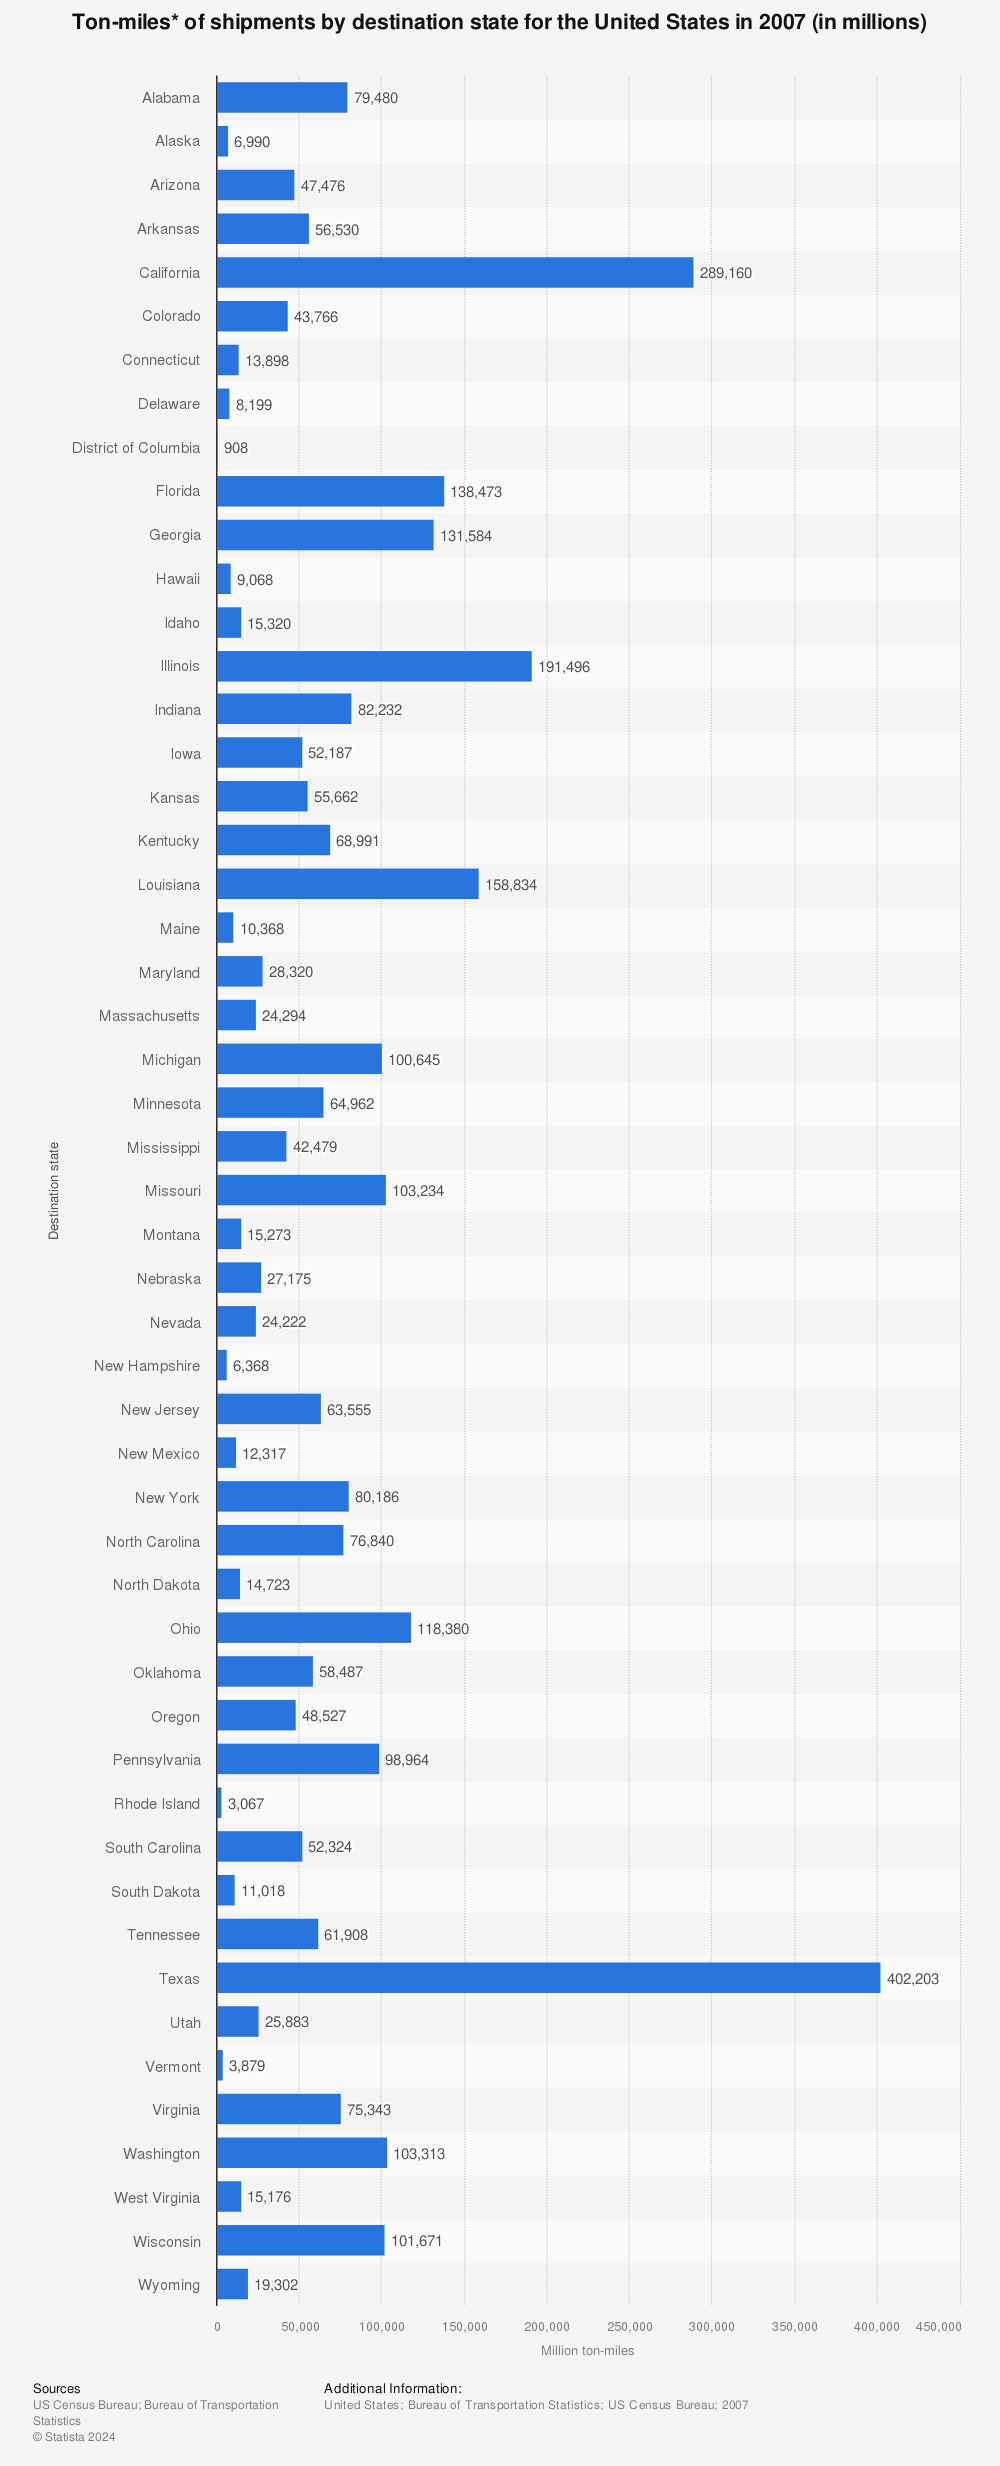 Statistic: Ton-miles* of shipments by destination state for the United States in 2007 (in millions) | Statista